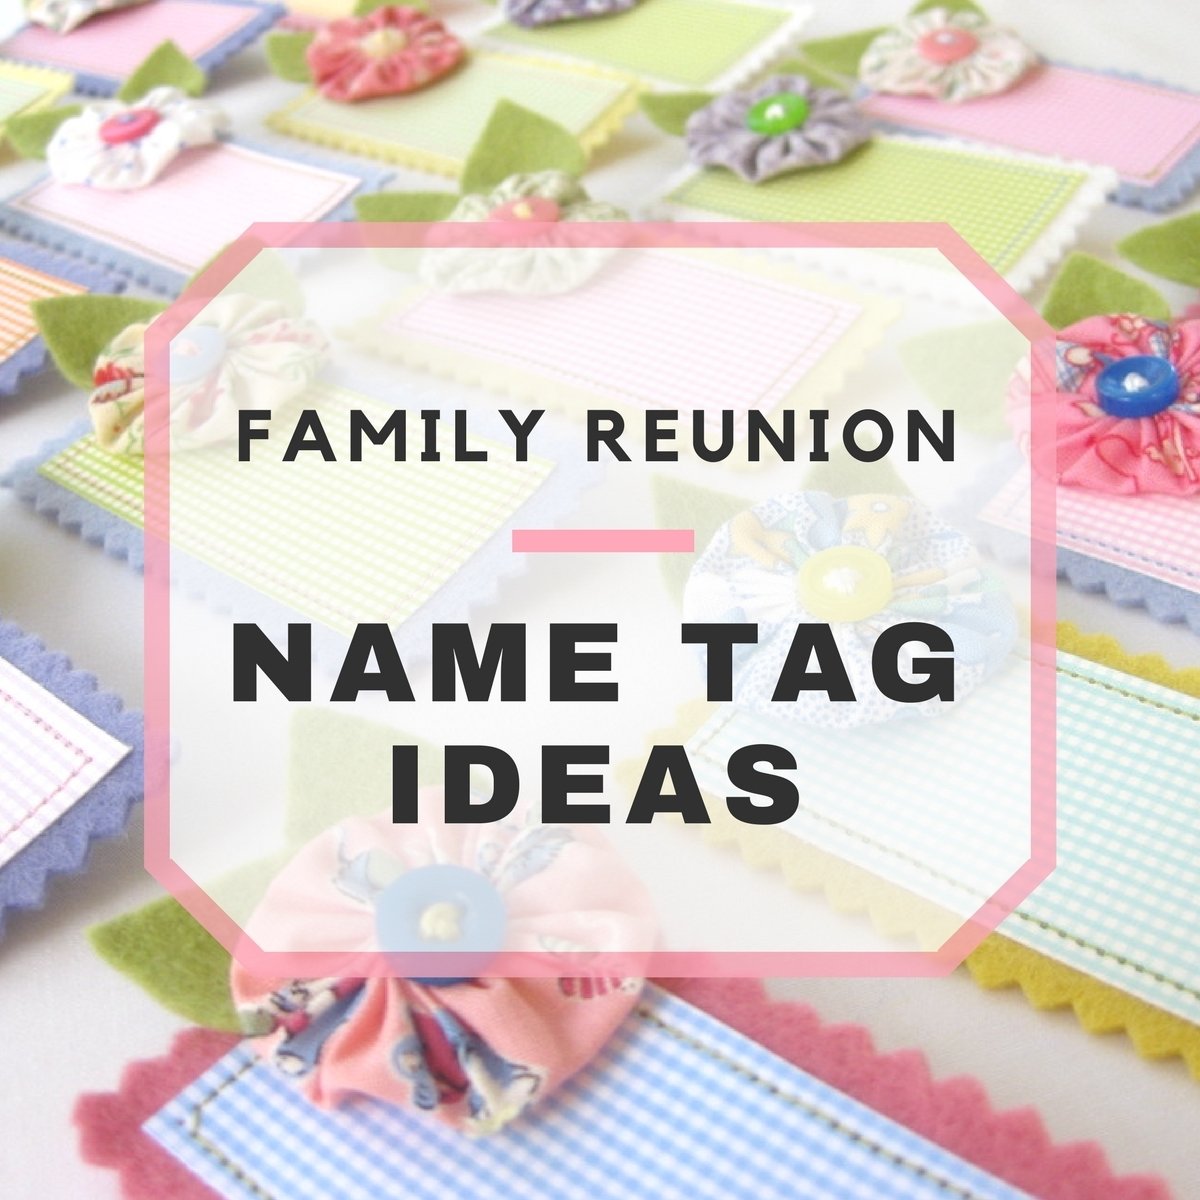 10 Most Recommended Ideas For A Family Reunion fun family reunion name tag ideas 2022